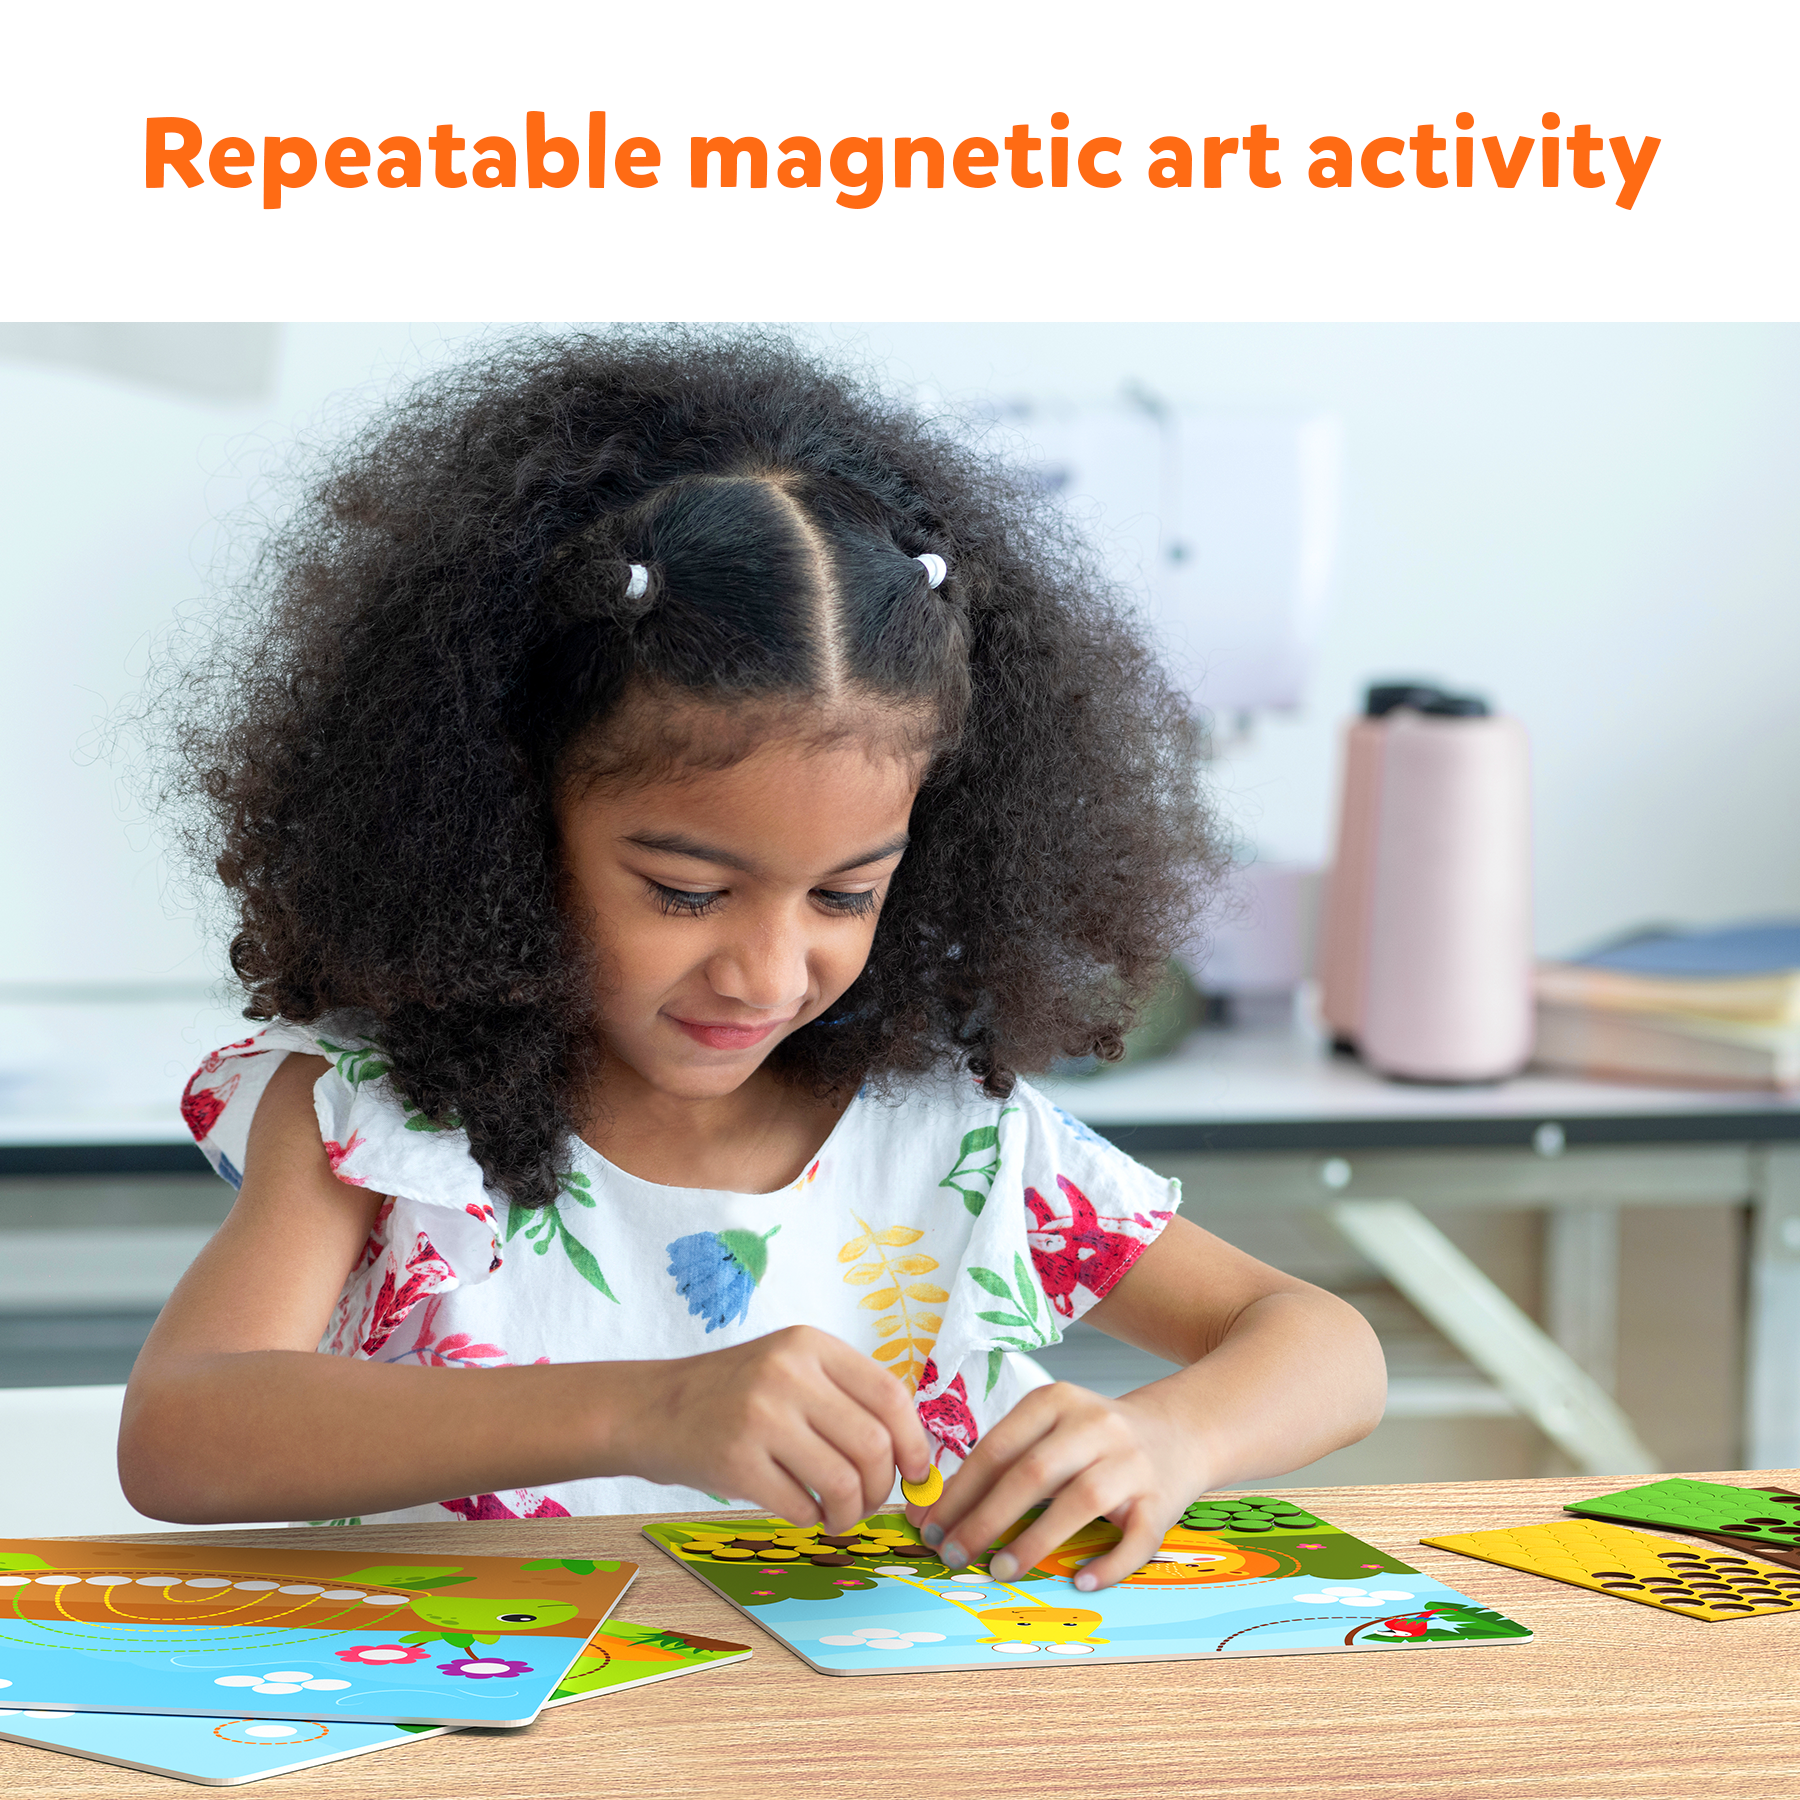 Skillmatics Art Activity Dot It with Magnets - Animals, No Mess Repeatable Art for Kids, Craft Kits, DIY Activity, Gifts for Ages 4 to 7